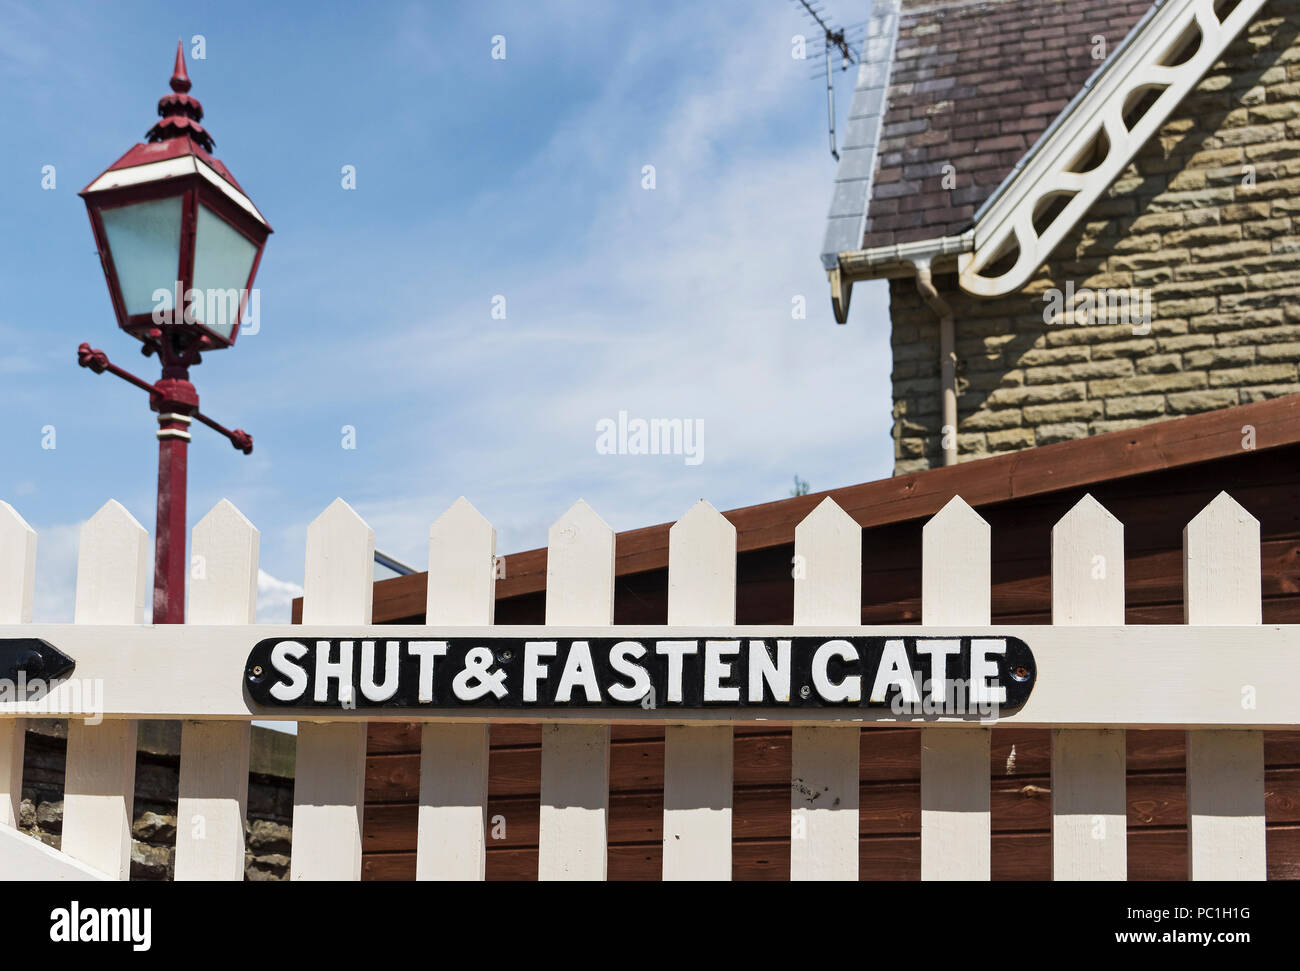 Shut and fasten gate sign at Settle to Carlisle railway station. Settle, North Yorkshire, UK Stock Photo